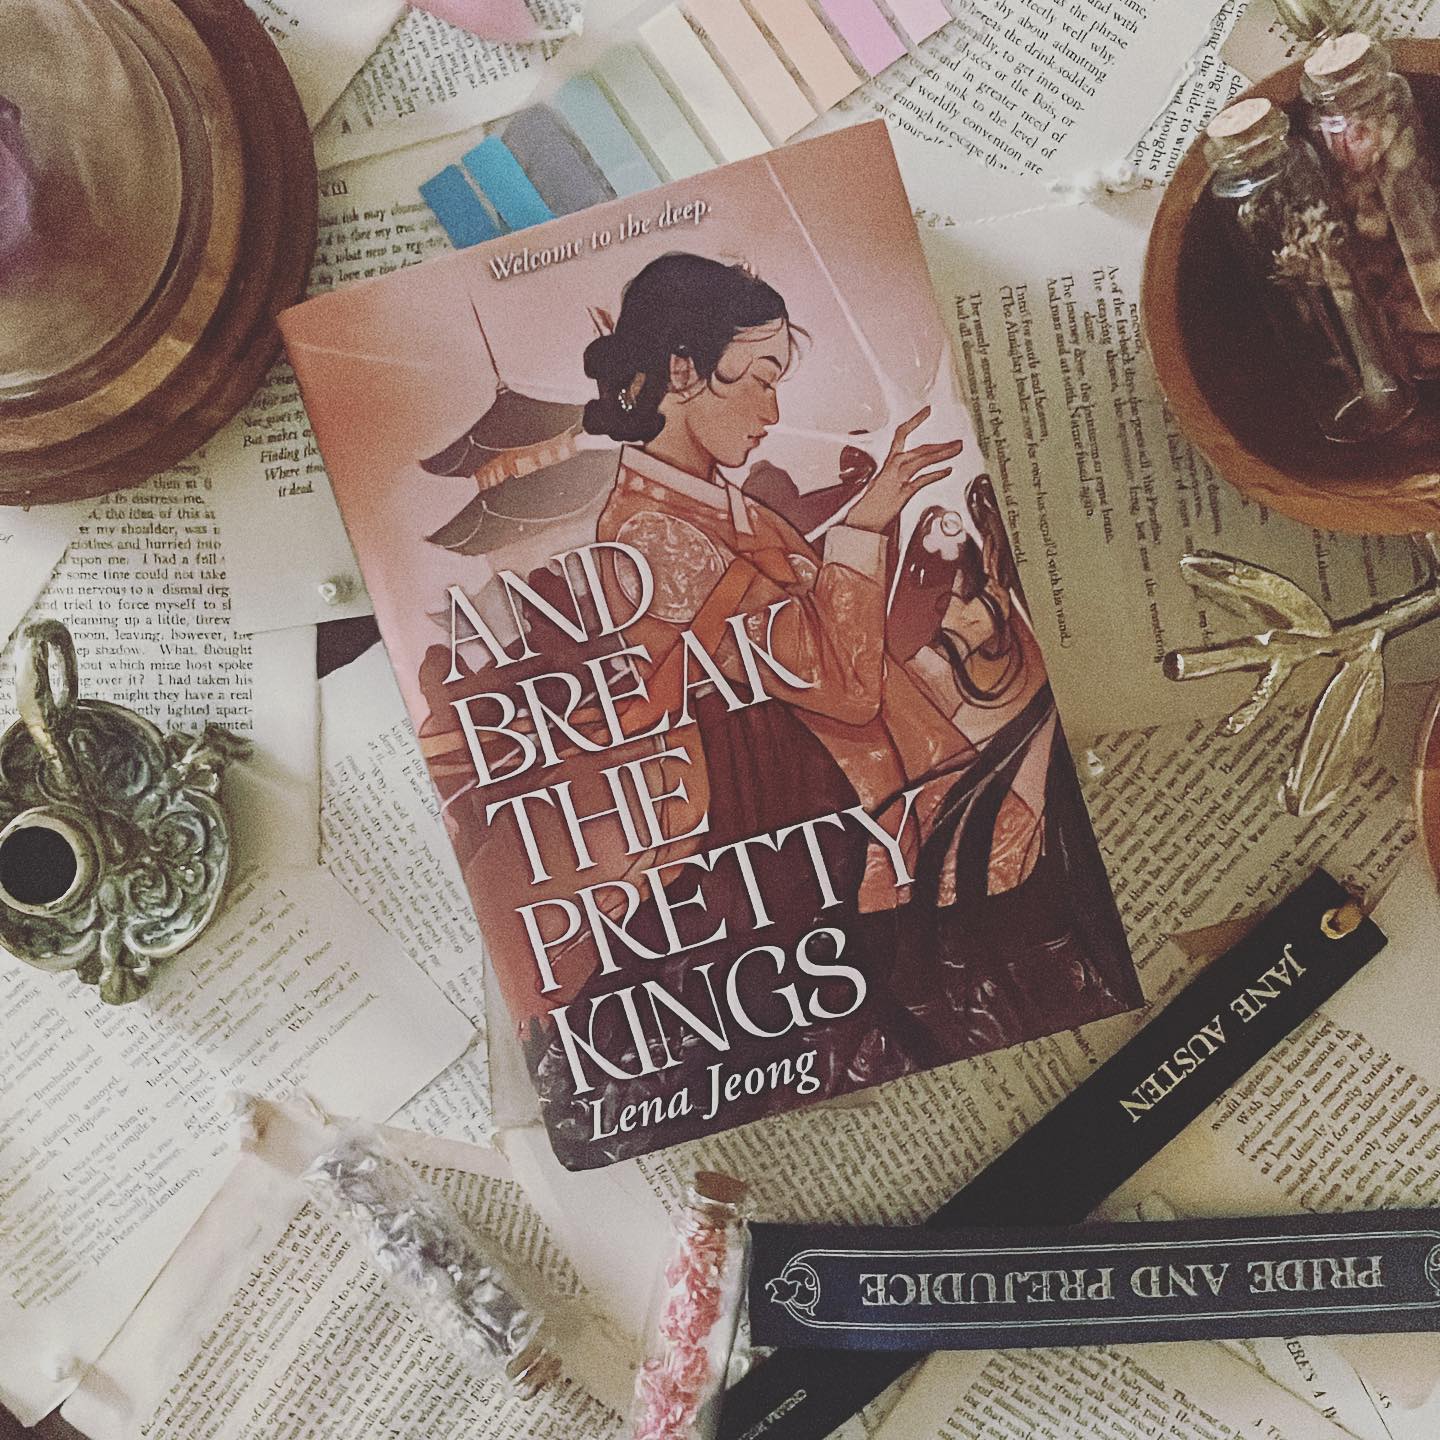 And Break the Pretty Kings by Lena Jeong